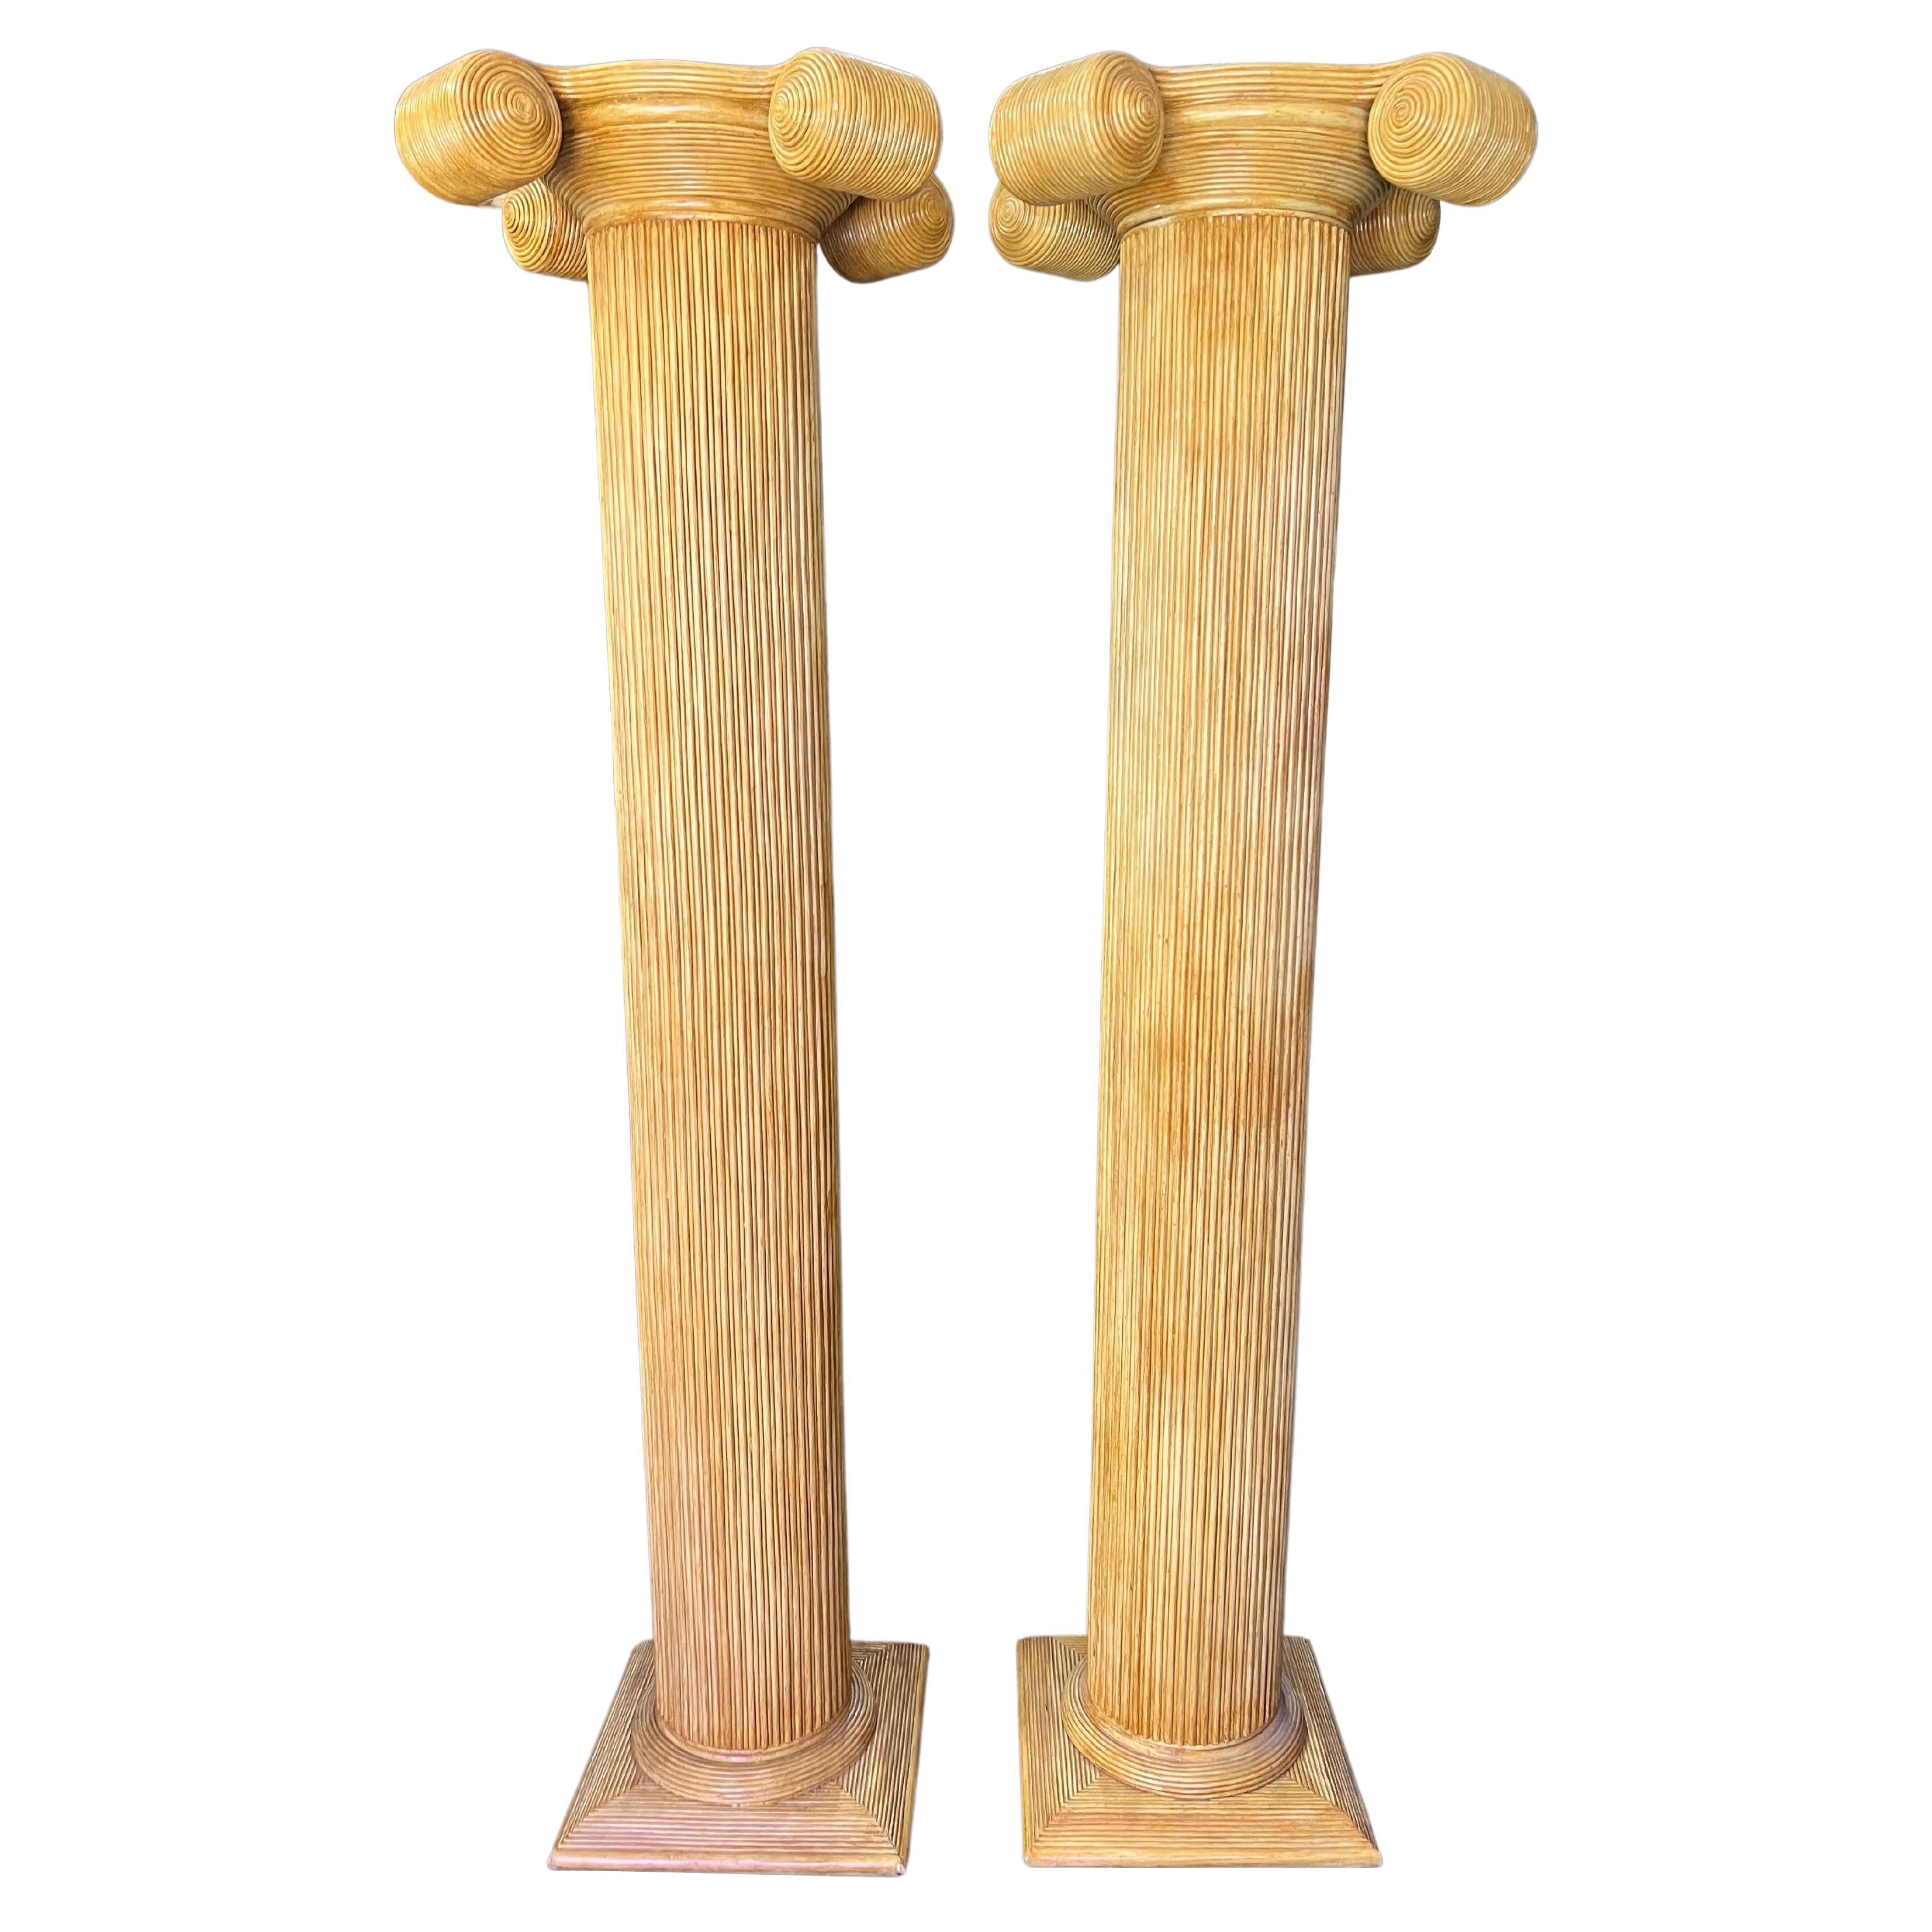 Pair of Bamboo Split Reed Ionic Columns